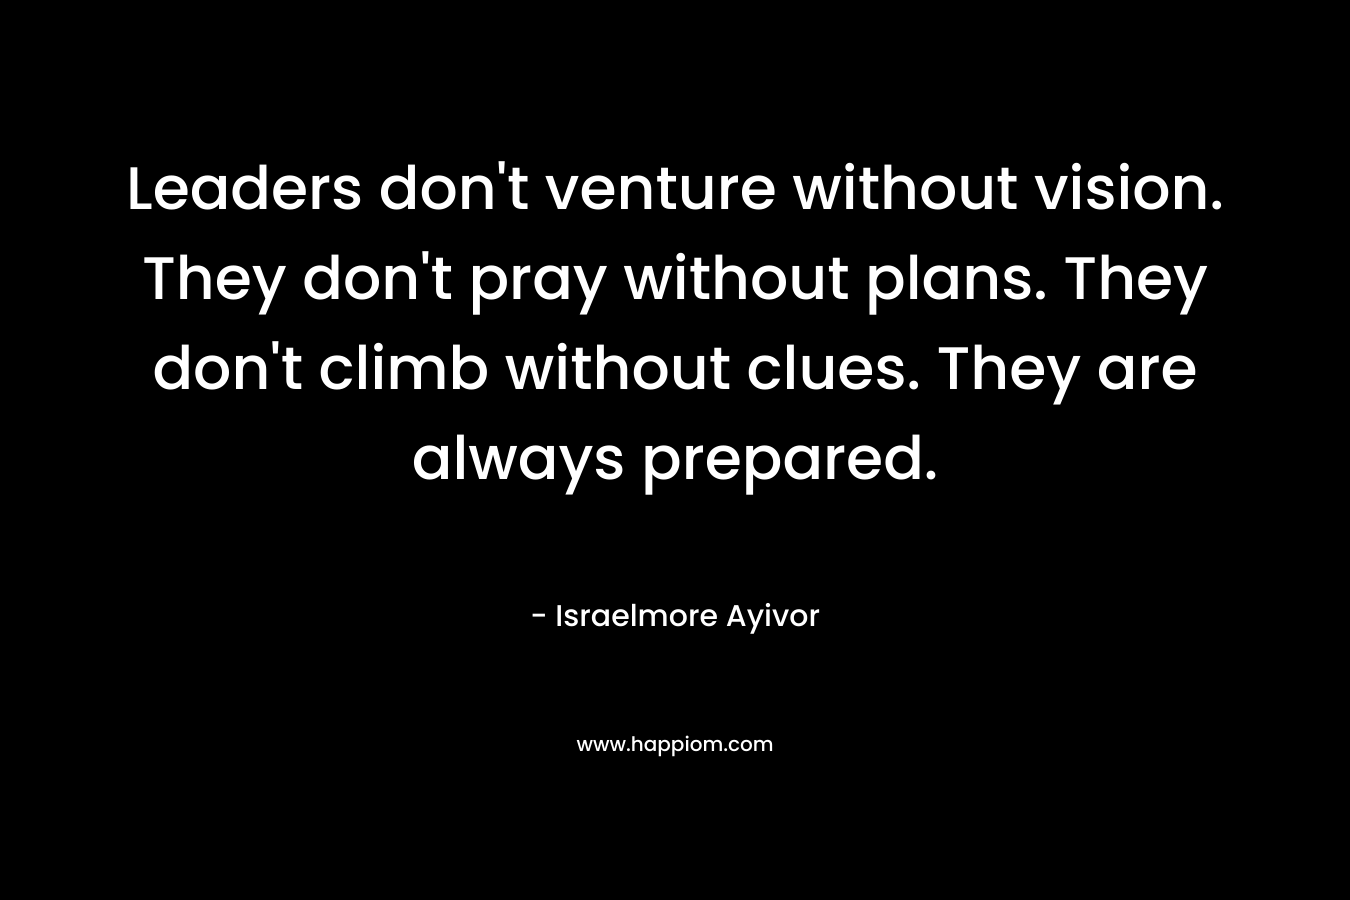 Leaders don’t venture without vision. They don’t pray without plans. They don’t climb without clues. They are always prepared. – Israelmore Ayivor